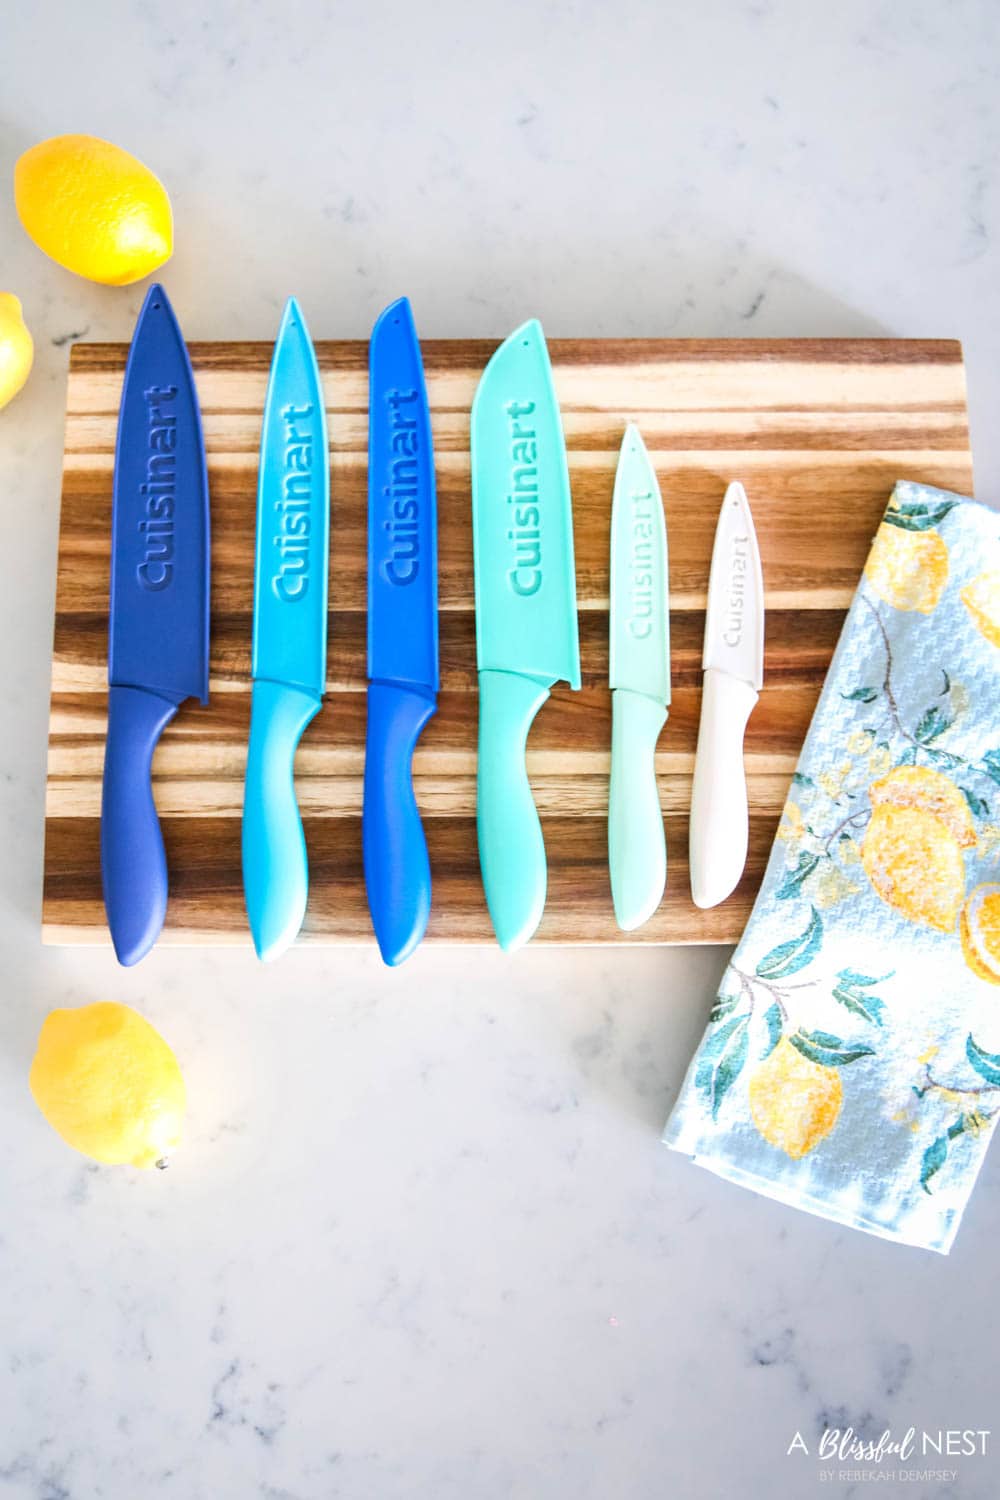 Love these affordable kitchen items for baking and cooking in shades of blue with citrus accents from Walmart. #ABlissfulNest #WalmartHome #sponsored #kitchen #baking